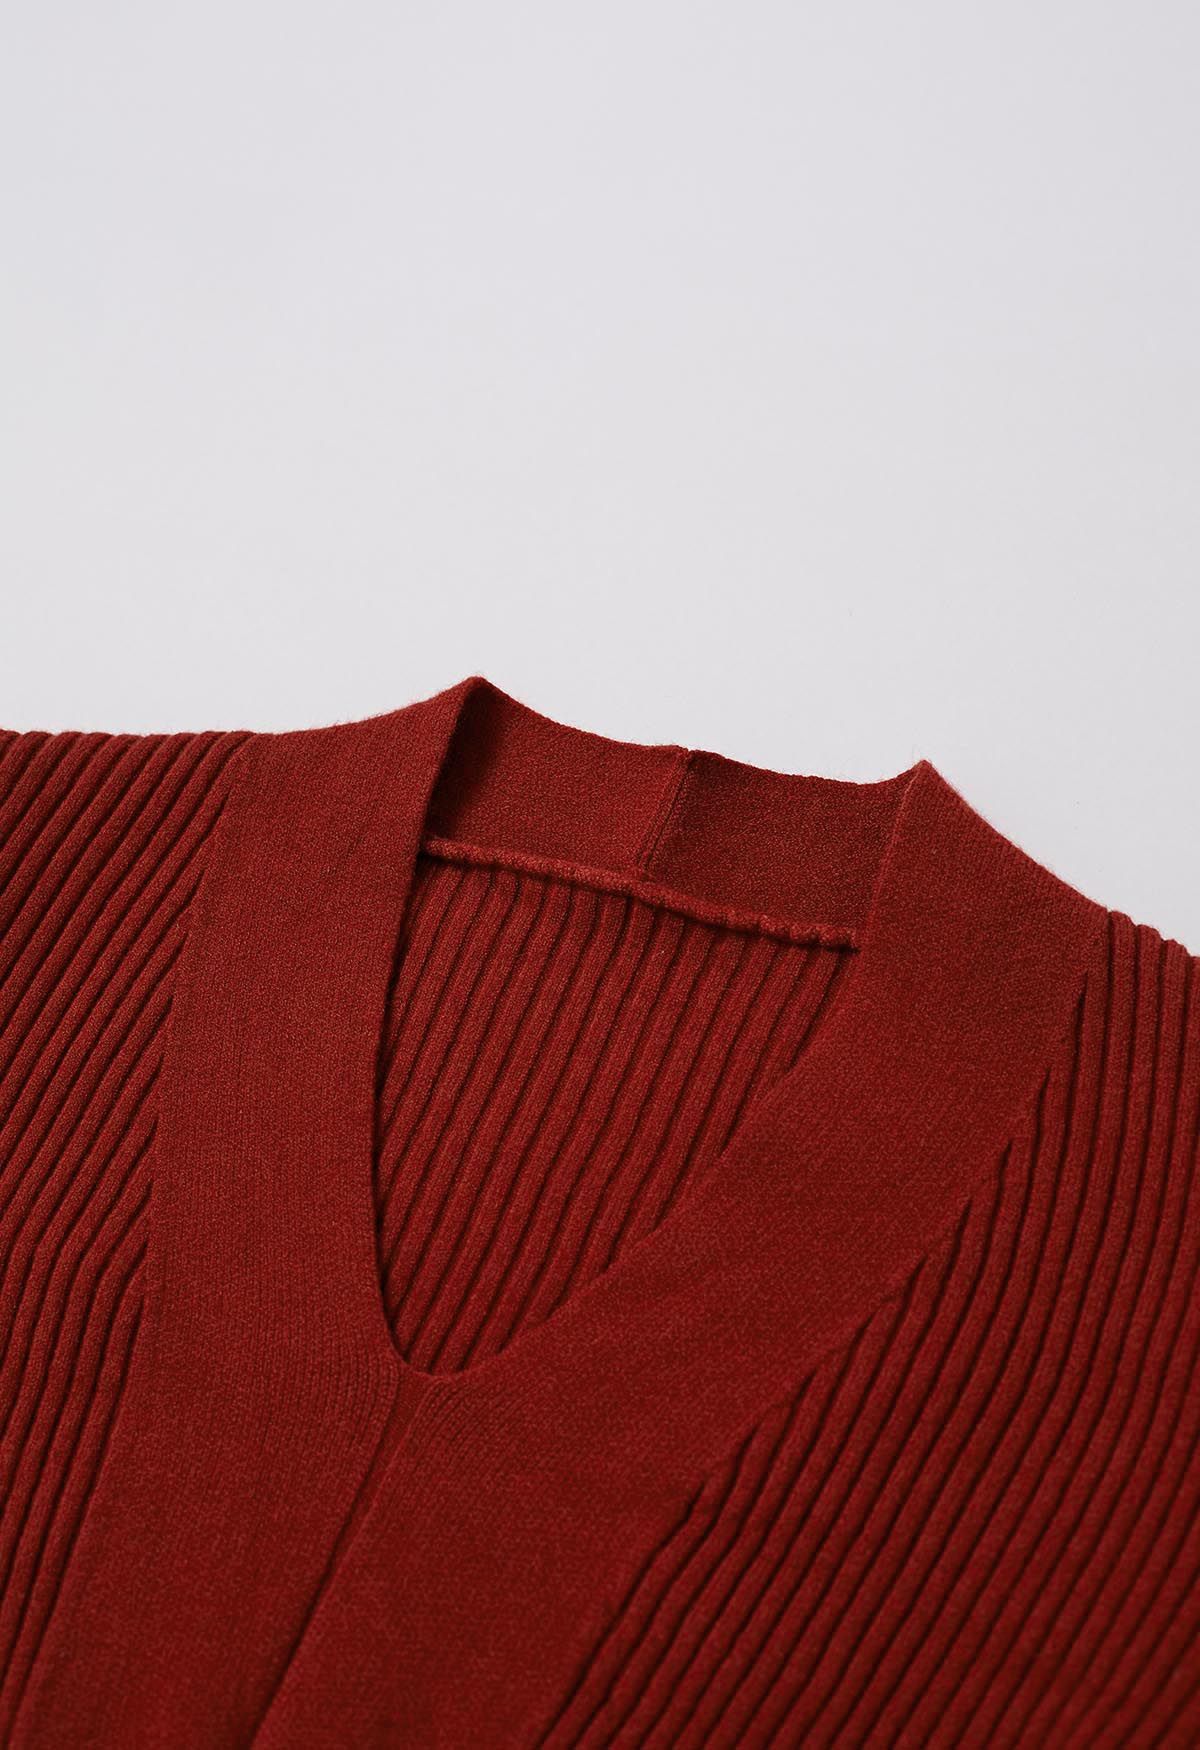 V-Neck Puff Shoulder Rib Knit Top in Red